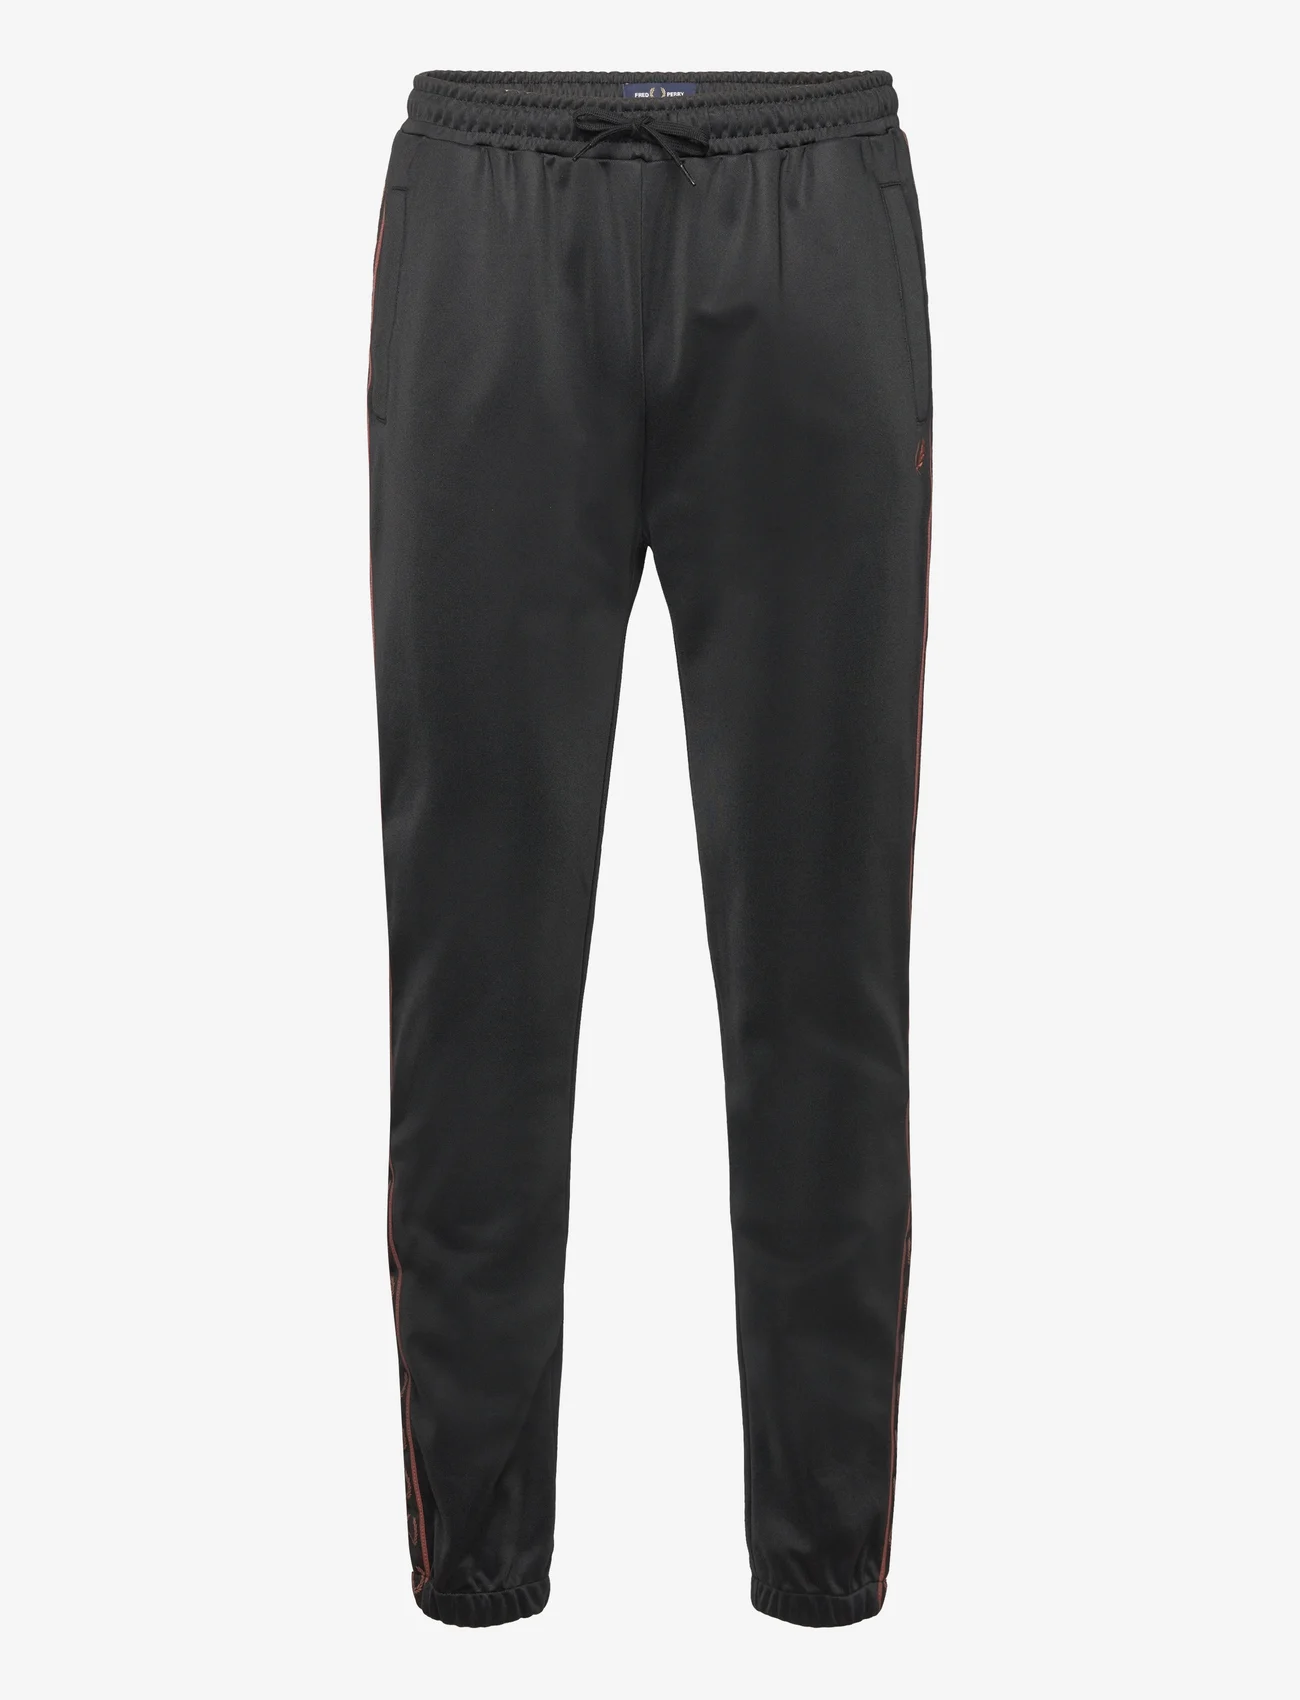 Fred Perry - CONTRAST TAPE TRACK PANT - joggingbyxor - black/whiskybrwn - 0